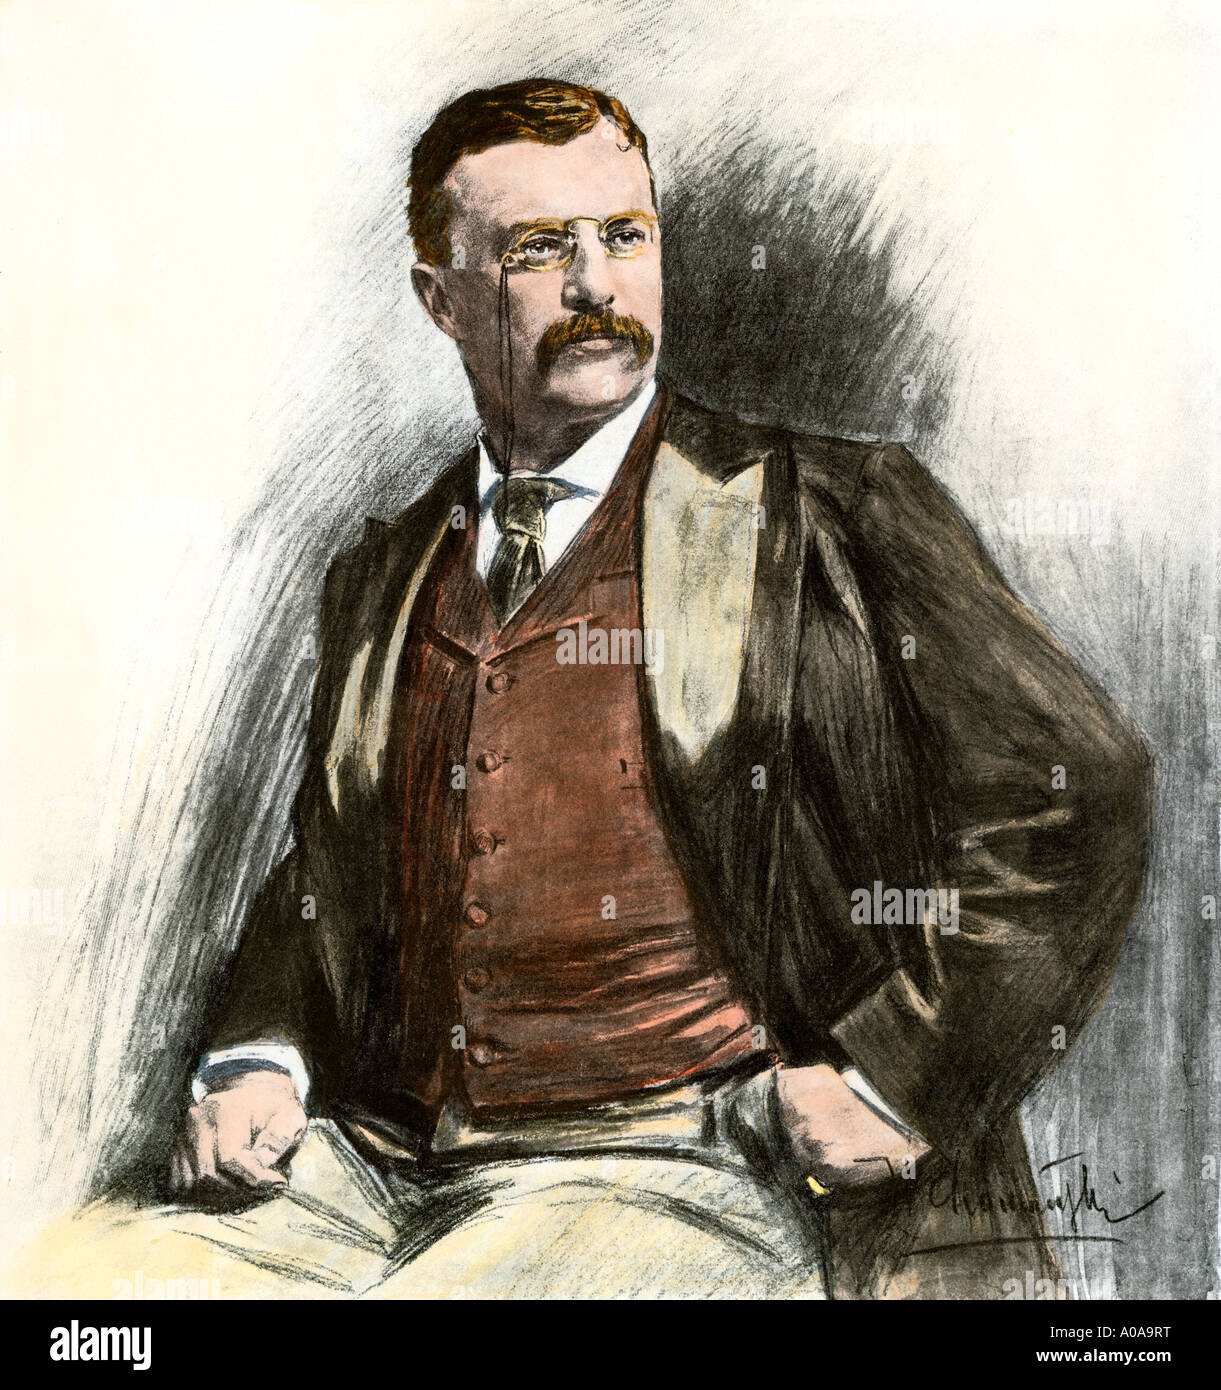 Theodore Roosevelt when nominated for Vice President in 1900. Hand-colored halftone of an illustration Stock Photo